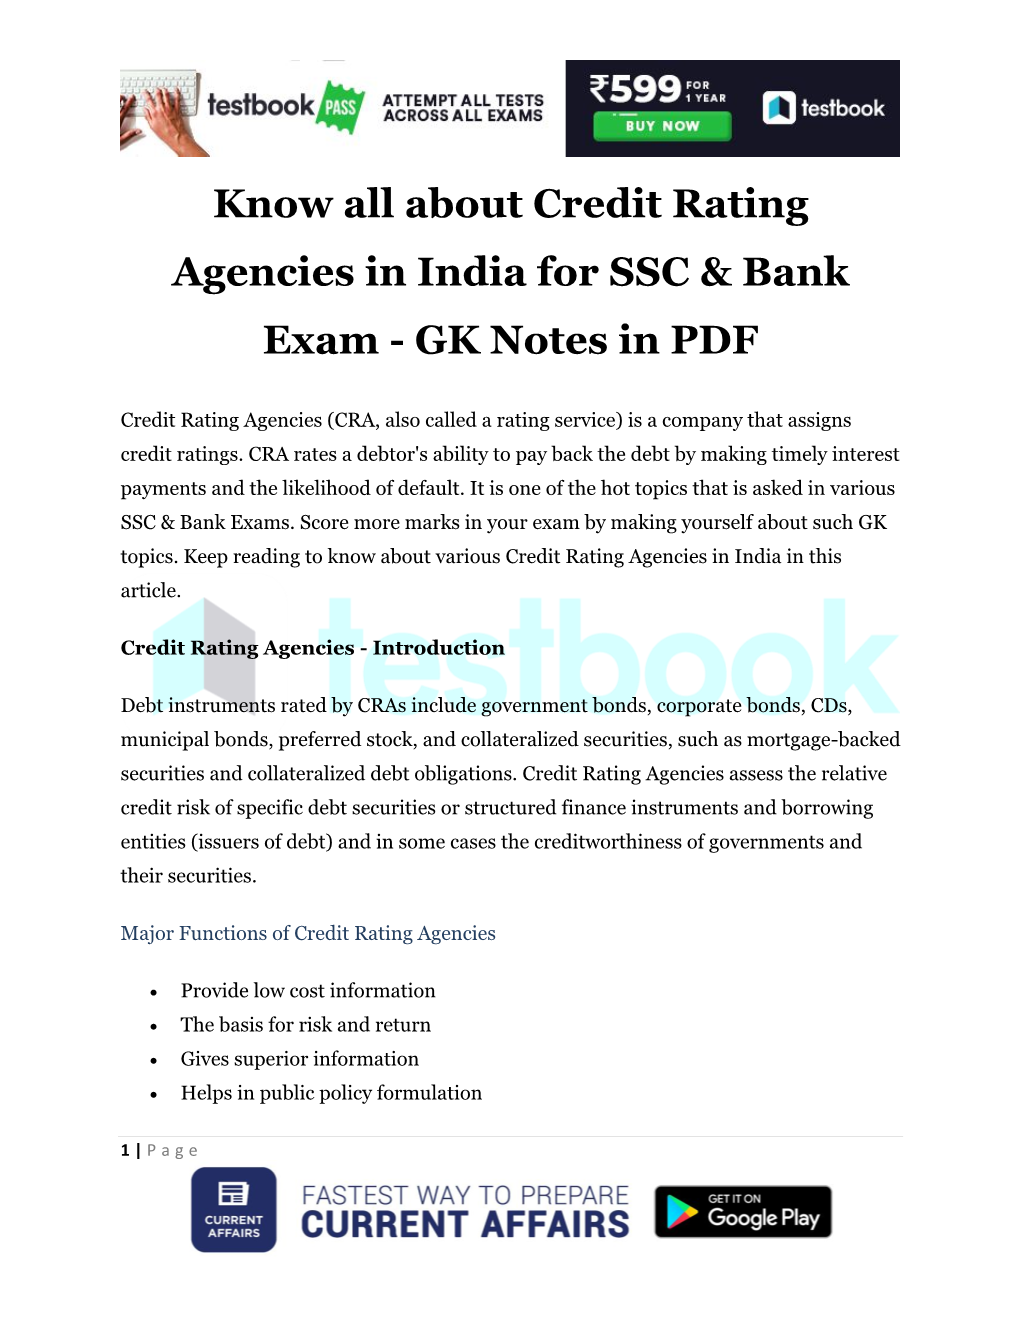 Know All About Credit Rating Agencies in India for SSC & Bank